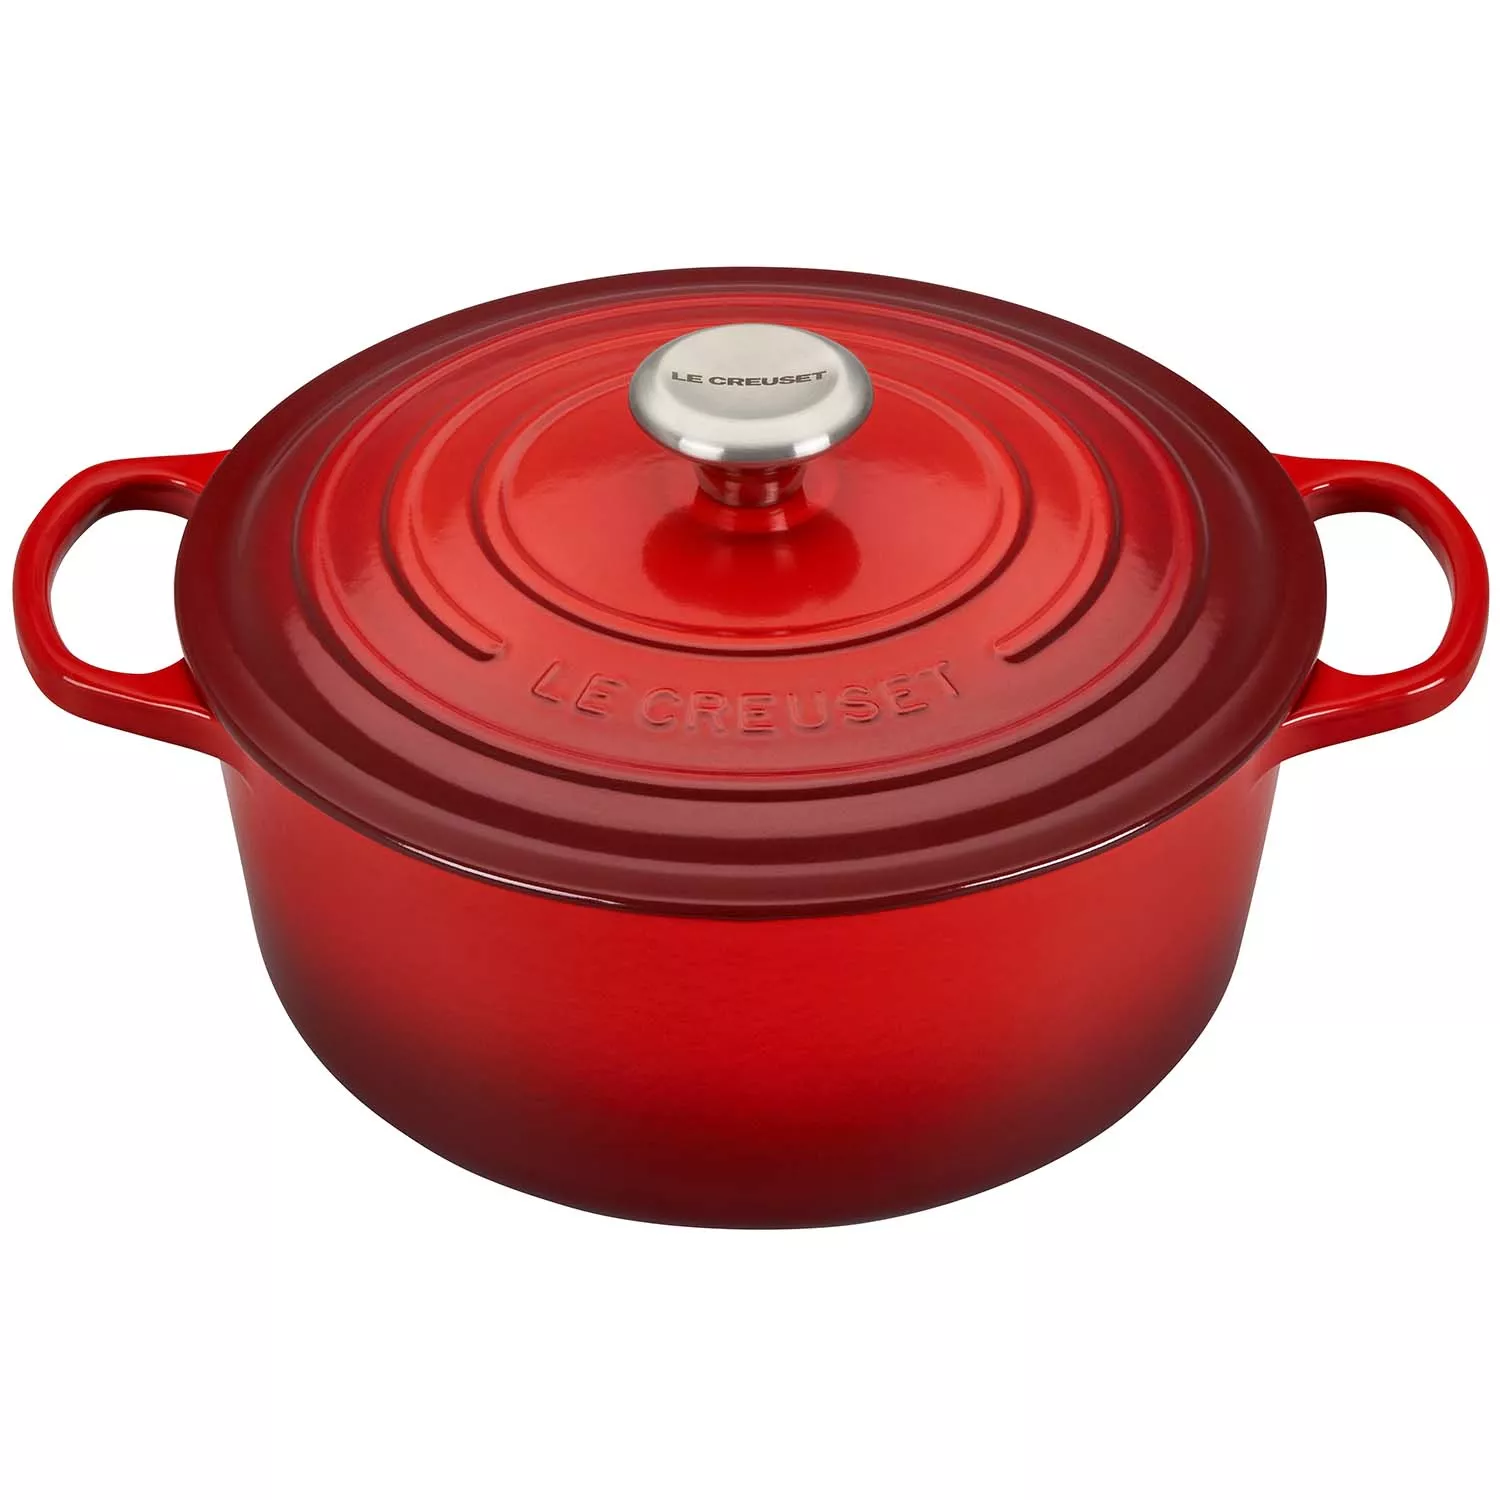 Early Christmas present from my in-laws, lodge 8 quart enameled dutch oven  in red. : r/castiron